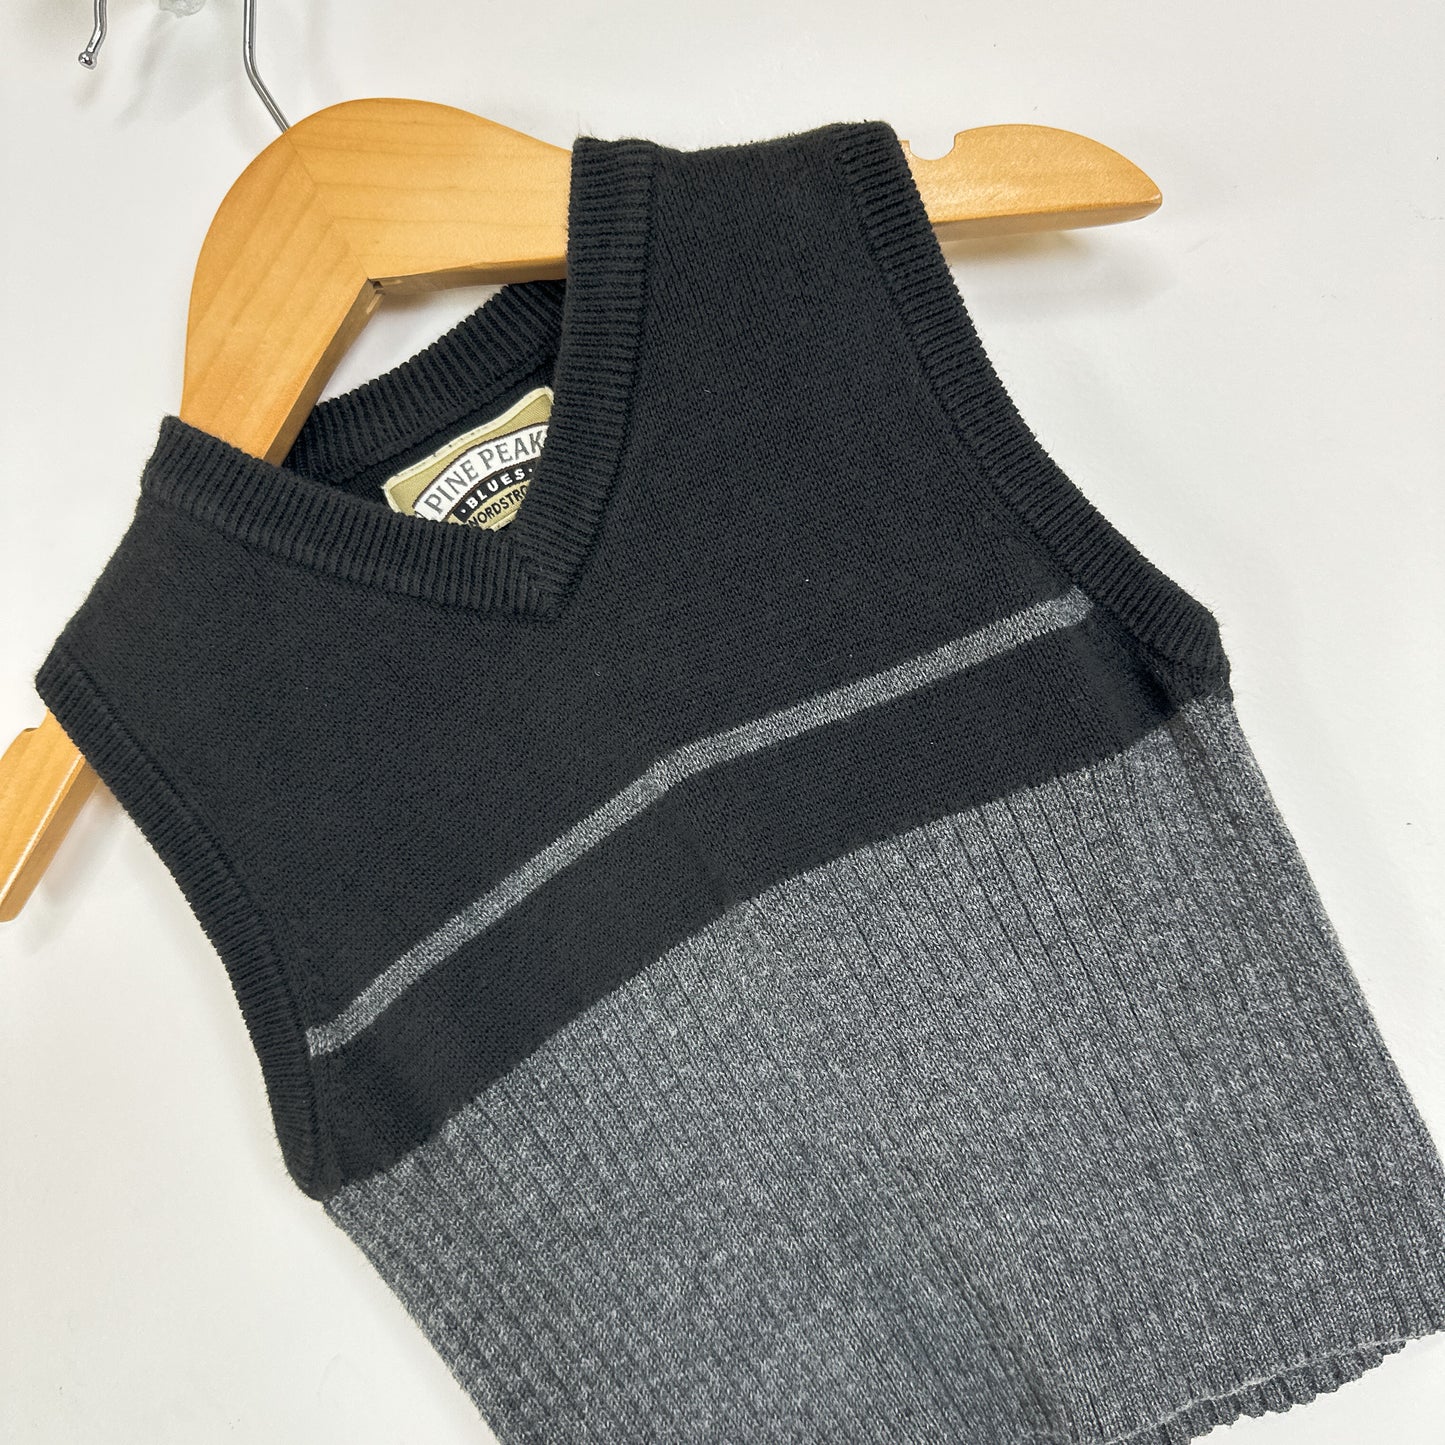 90's Toddler Black and Gray Sweater Vest - 18mo